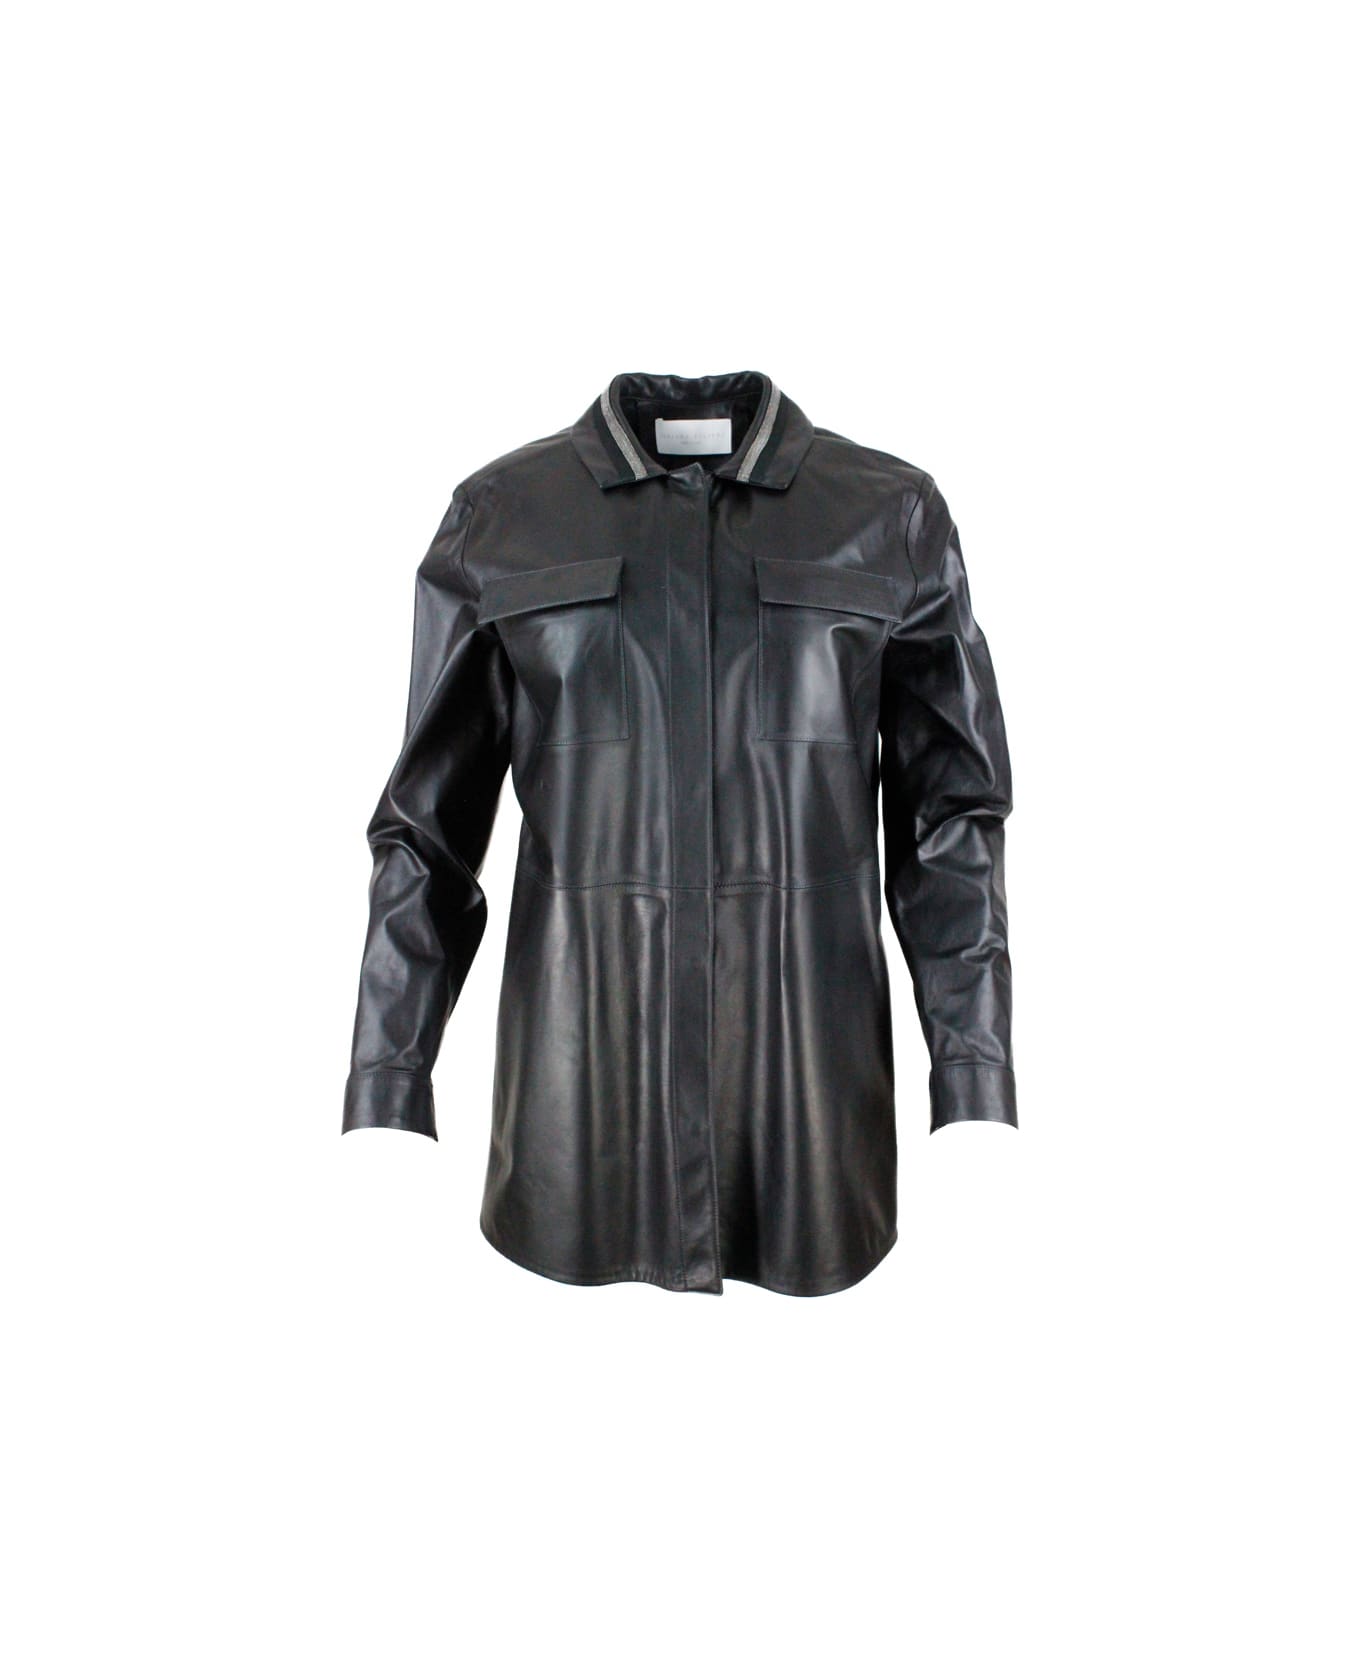 Fabiana Filippi Leather Shirt Jacket With Button Closure, With Belt And With Monile On The Collar - Black コート